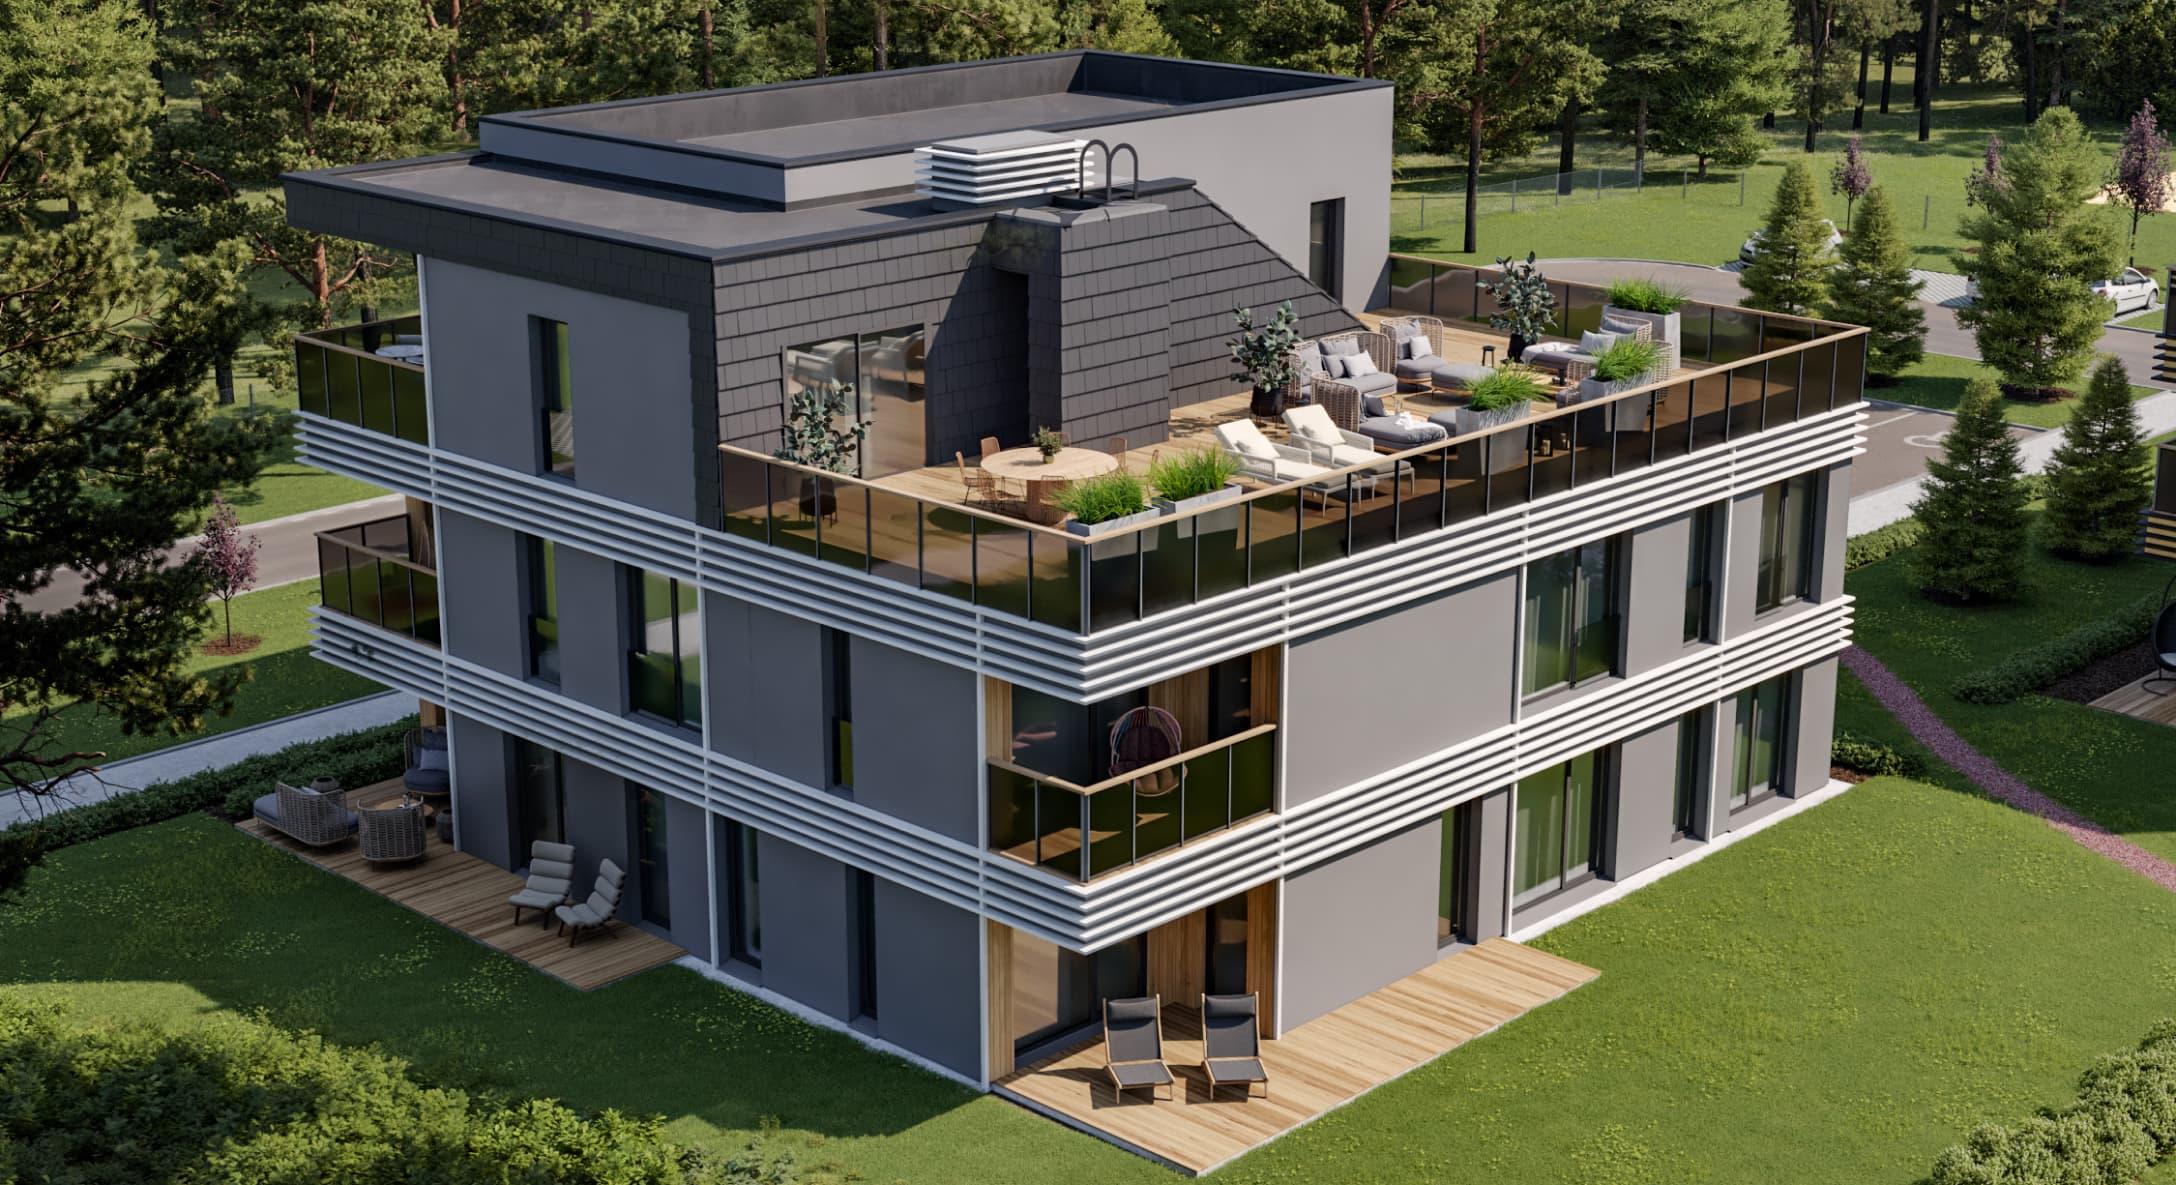 These modern villas have just six apartments each, making them a perfect fit for Nõmme that’s known for its tranquillity. You can choose from up to 5-room apartments with spacious layouts and a balcony or terrace. The sheer size and character of these apartments can compete even with private residences.